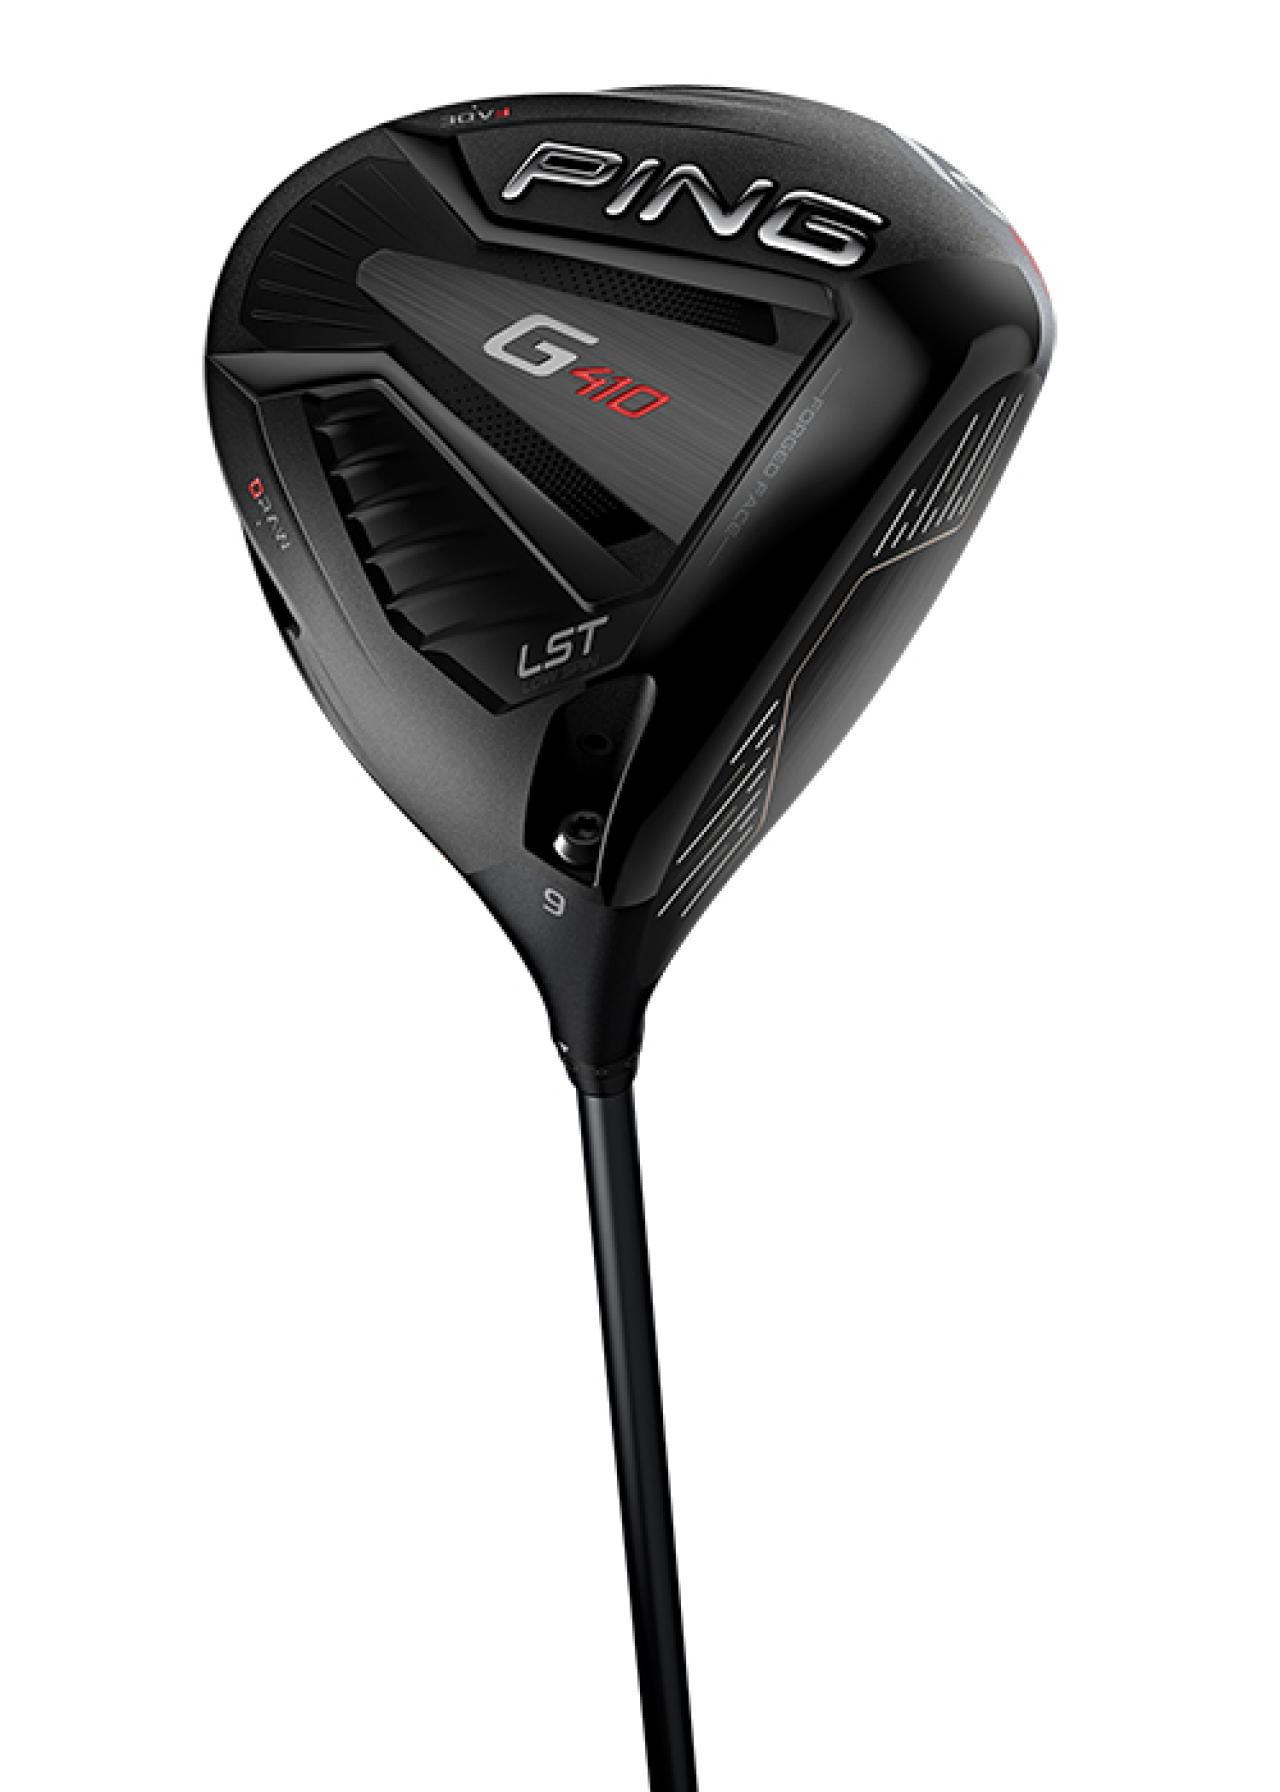 Ping G410 LST driver expands the company's G410 lineup to include